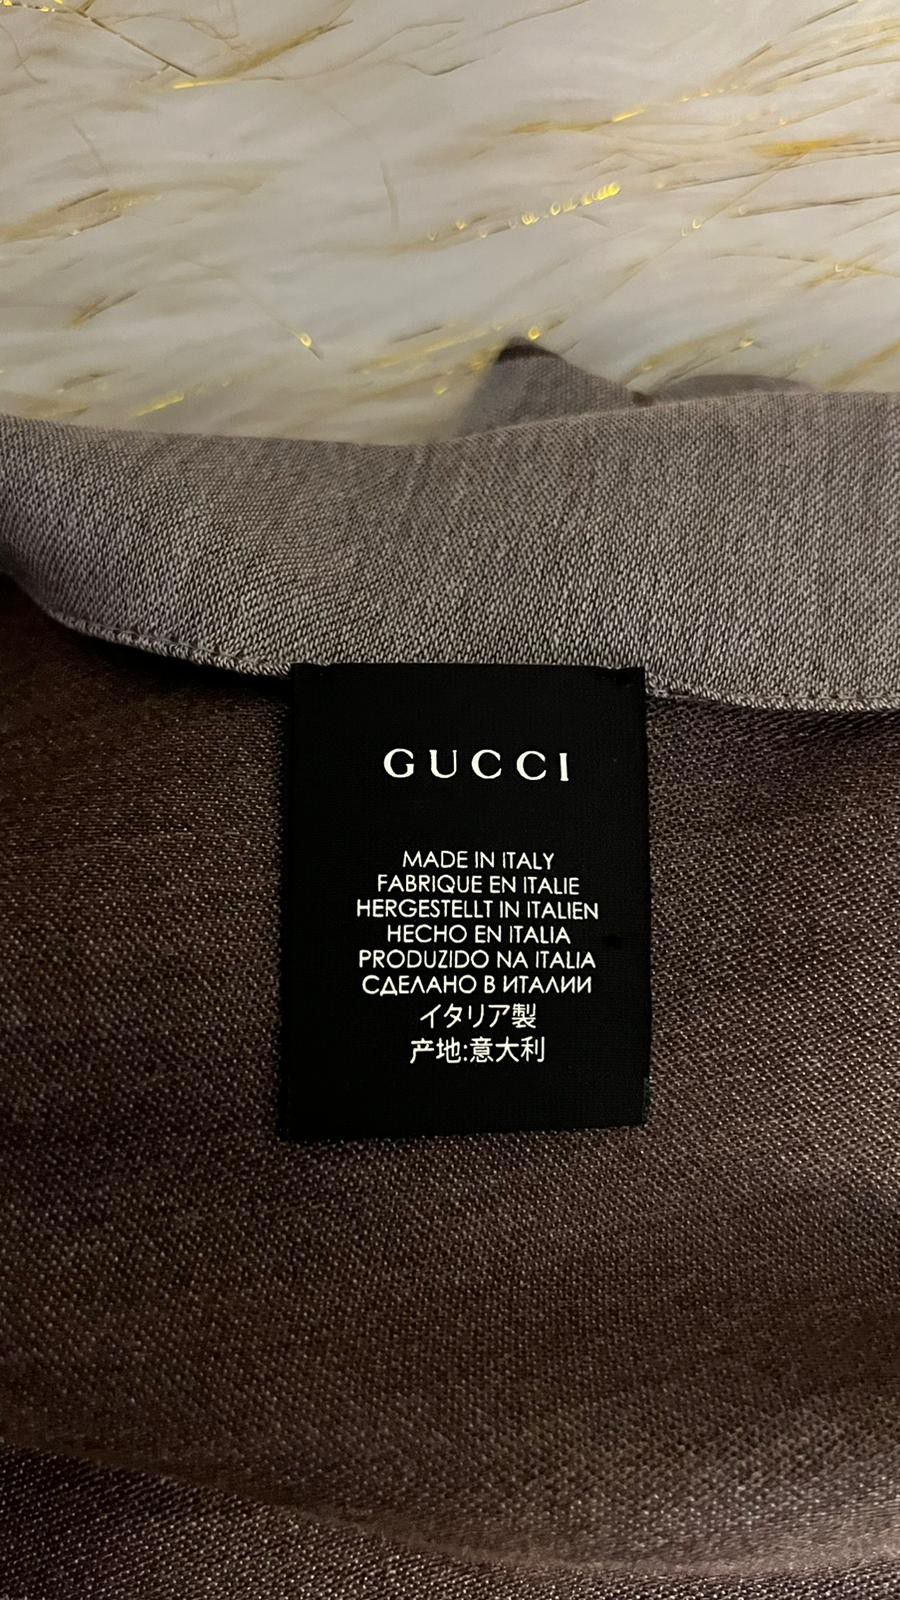 100% Authentic. Beautiful Gucci Scarf.